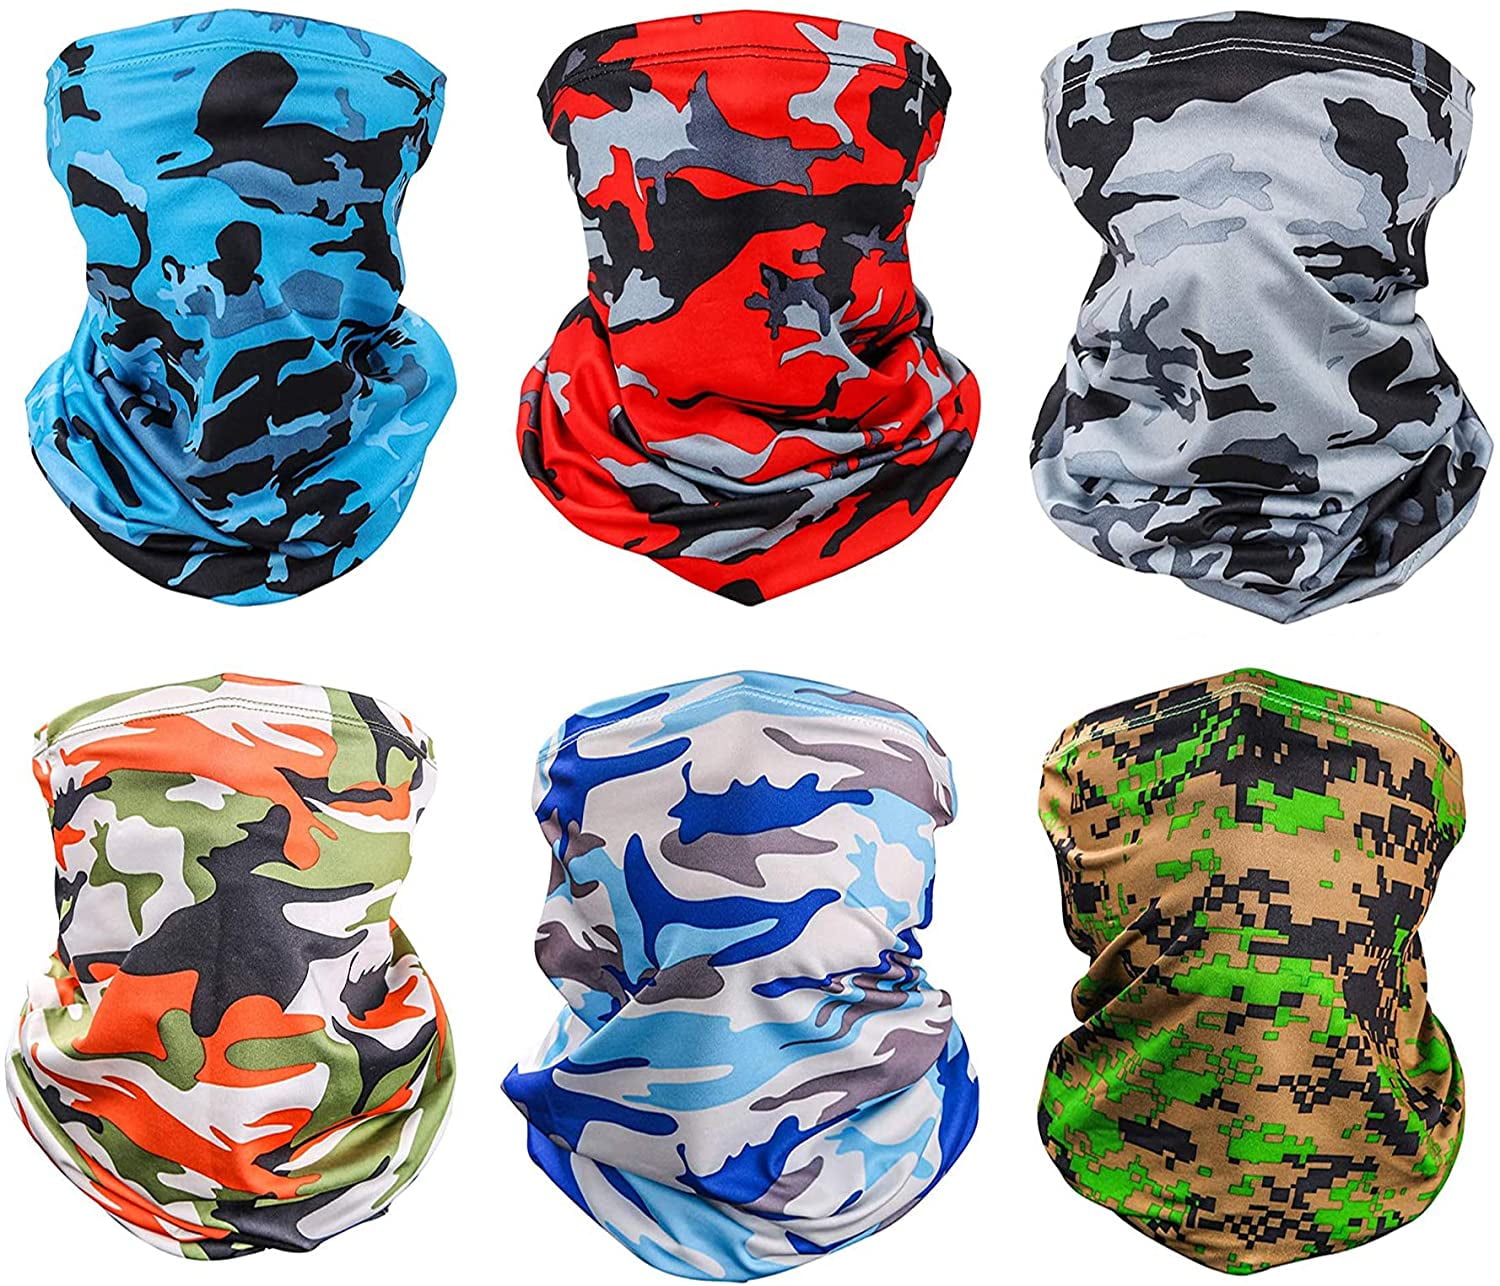 Windproof Scarf Sunscreen Breathable Bandana for Outdoor and Sports 3 Pieces Neck Gaiter face mask,Balaclava Face Mask Neck Gaiter Headwear Head Wrap Neck Gaiter Headband 